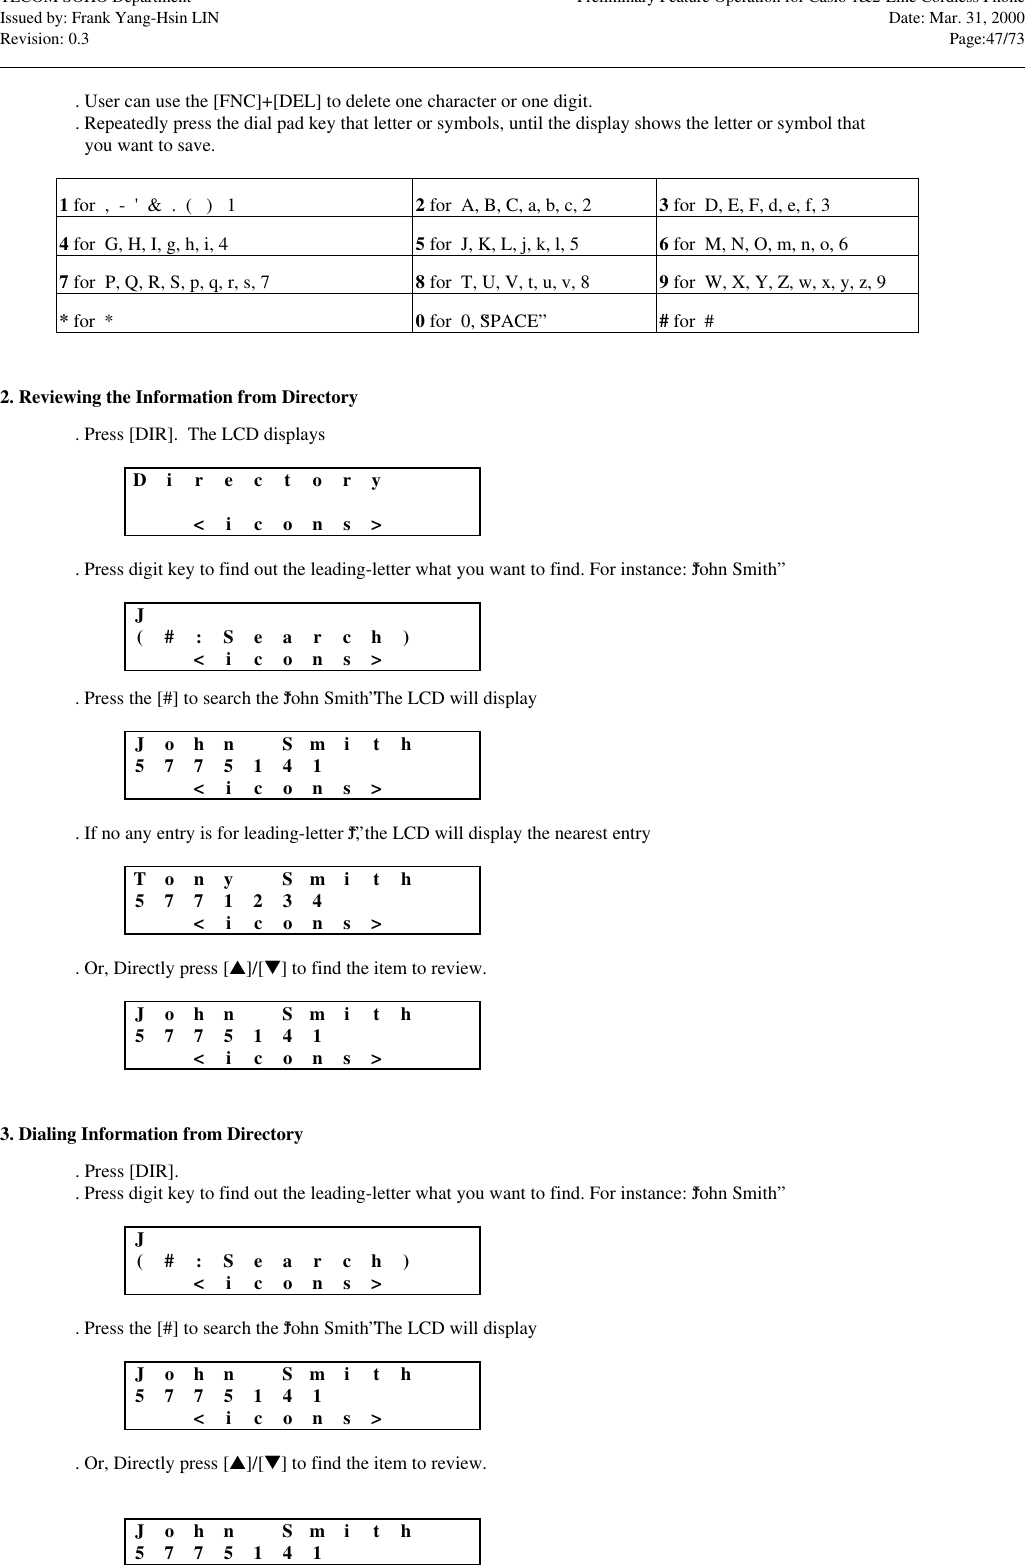 TECOM SOHO Department Preliminary Feature Operation for Casio 1&amp;2-Line Cordless PhoneIssued by: Frank Yang-Hsin LIN Date: Mar. 31, 2000Revision: 0.3 Page:47/73                                                                                                                                                                                                                                                                                                                            . User can use the [FNC]+[DEL] to delete one character or one digit.. Repeatedly press the dial pad key that letter or symbols, until the display shows the letter or symbol that  you want to save.1 for  ,  -  &apos;  &amp;  .  (   )   1 2 for  A, B, C, a, b, c, 2 3 for  D, E, F, d, e, f, 34 for  G, H, I, g, h, i, 4 5 for  J, K, L, j, k, l, 5 6 for  M, N, O, m, n, o, 67 for  P, Q, R, S, p, q, r, s, 7 8 for  T, U, V, t, u, v, 8 9 for  W, X, Y, Z, w, x, y, z, 9* for  * 0 for  0, “SPACE”# for  #2. Reviewing the Information from Directory. Press [DIR].  The LCD displaysDir e c tory&lt;icons&gt;. Press digit key to find out the leading-letter what you want to find. For instance: “John Smith”J(#:Sear c h)&lt;icons&gt;. Press the [#] to search the “John Smith” The LCD will displayJoh n Smith5775141&lt;icons&gt;. If no any entry is for leading-letter “J”, the LCD will display the nearest entryTonySmith5771234&lt;icons&gt;. Or, Directly press [s]/[t] to find the item to review.Joh n Smith5775141&lt;icons&gt;3. Dialing Information from Directory. Press [DIR].. Press digit key to find out the leading-letter what you want to find. For instance: “John Smith”J(#:Sear c h)&lt;icons&gt;. Press the [#] to search the “John Smith” The LCD will displayJoh n Smith5775141&lt;icons&gt;. Or, Directly press [s]/[t] to find the item to review.Joh n Smith5775141